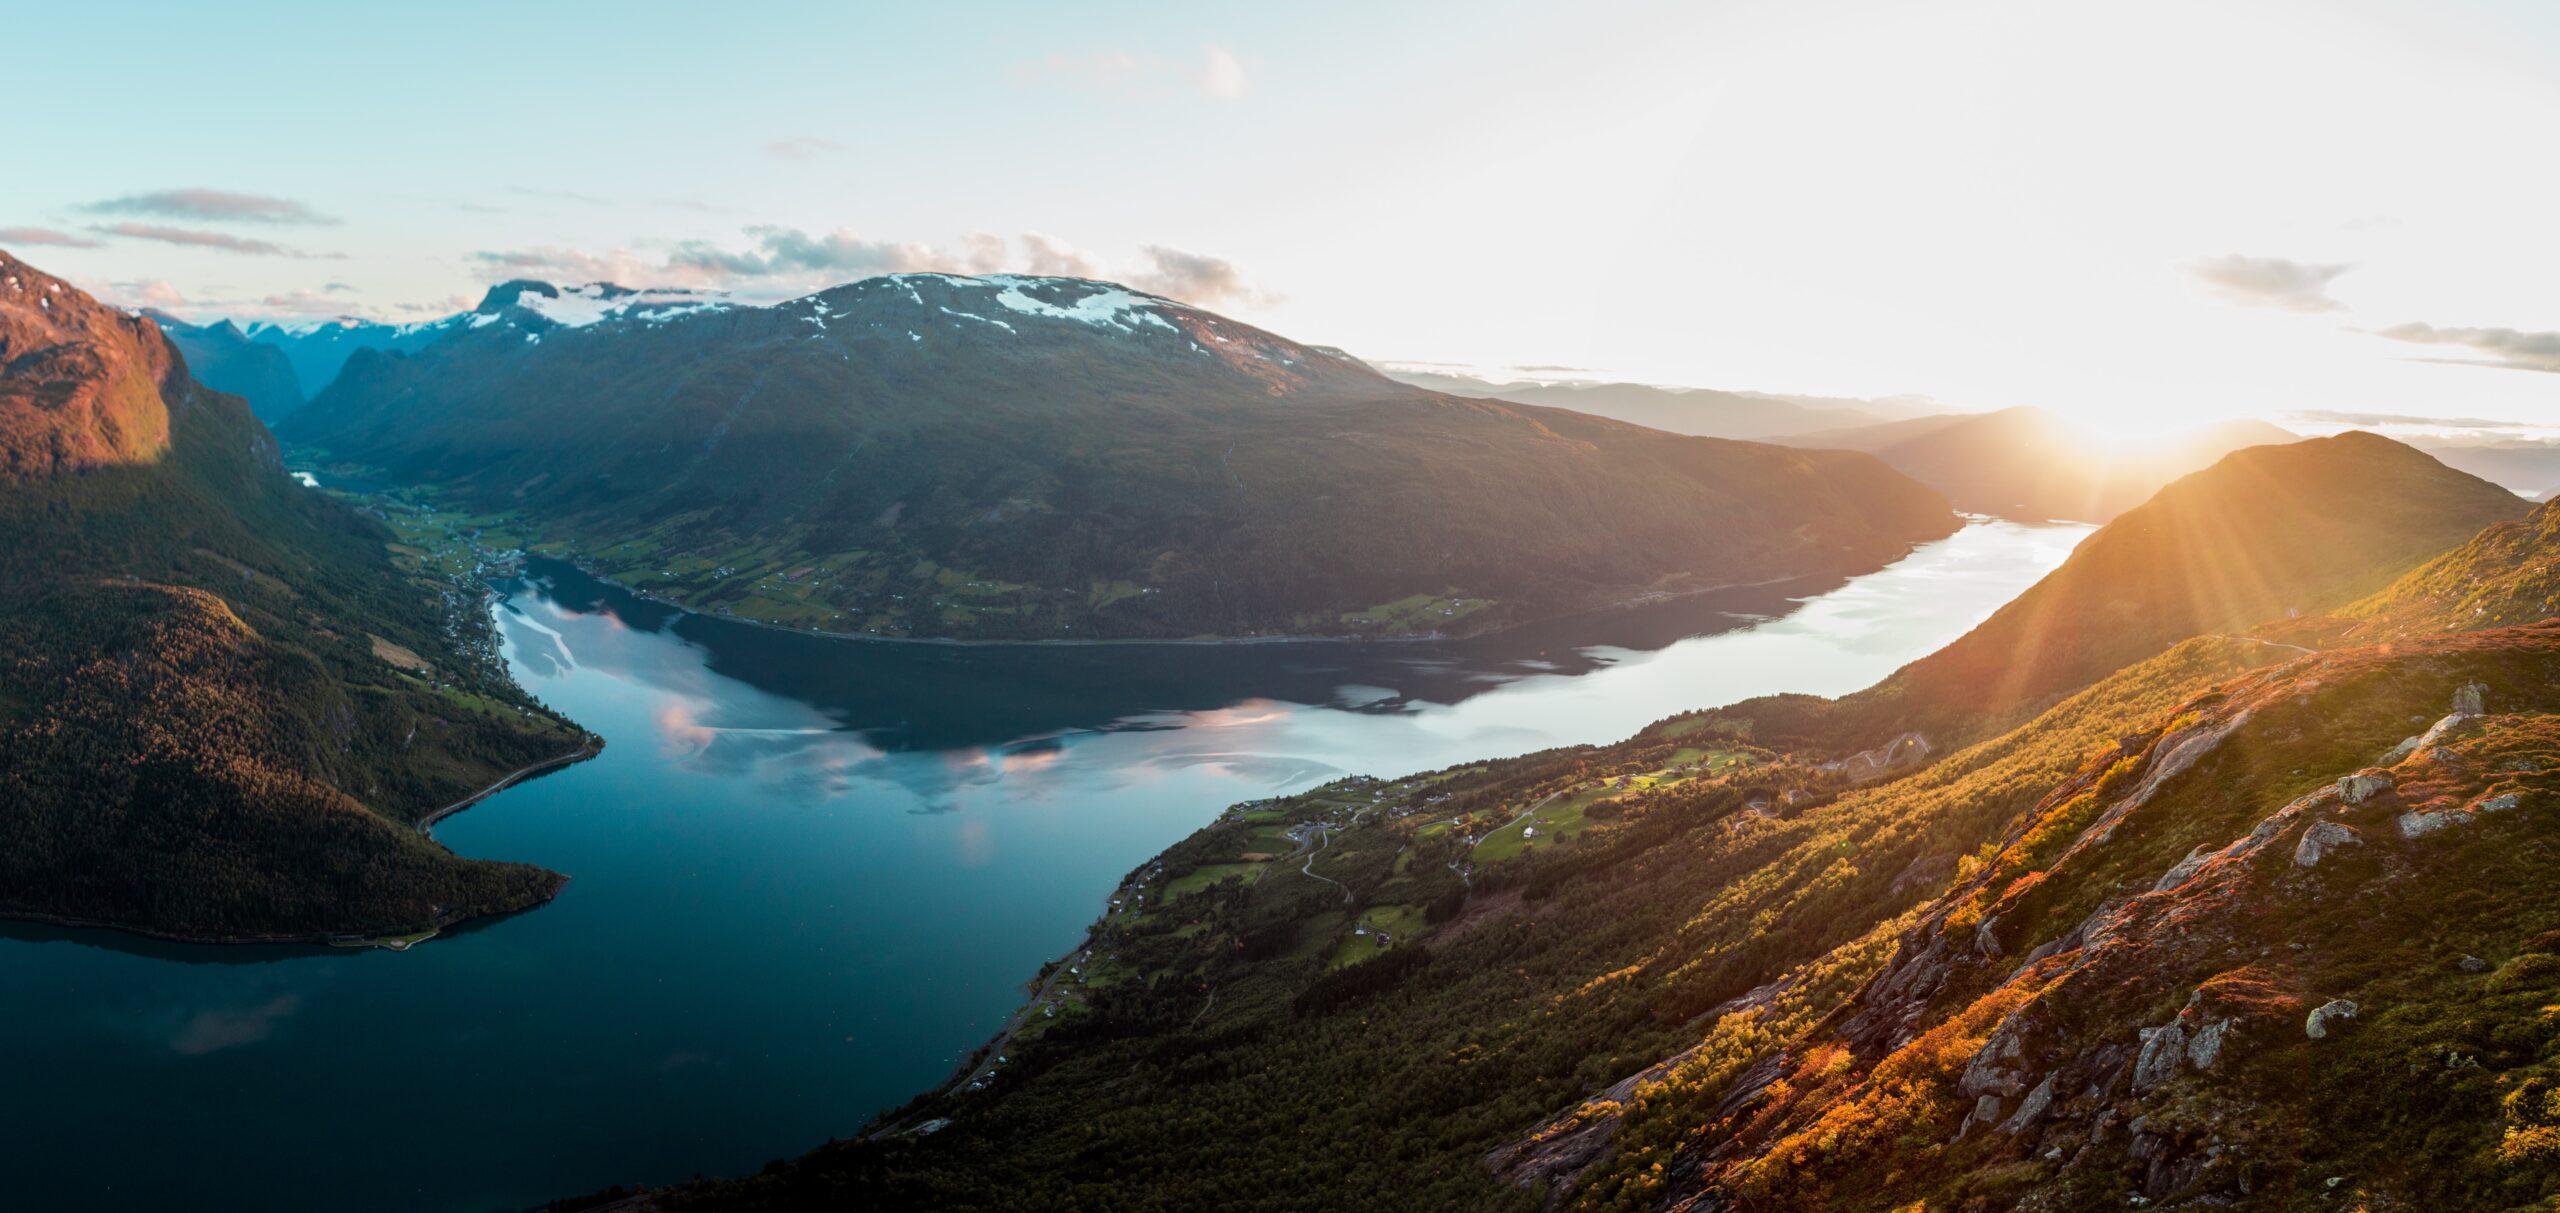 Solar Sails And Electric Propellors, How Hurtigruten Norway Is Going Green. Source: Unsplash